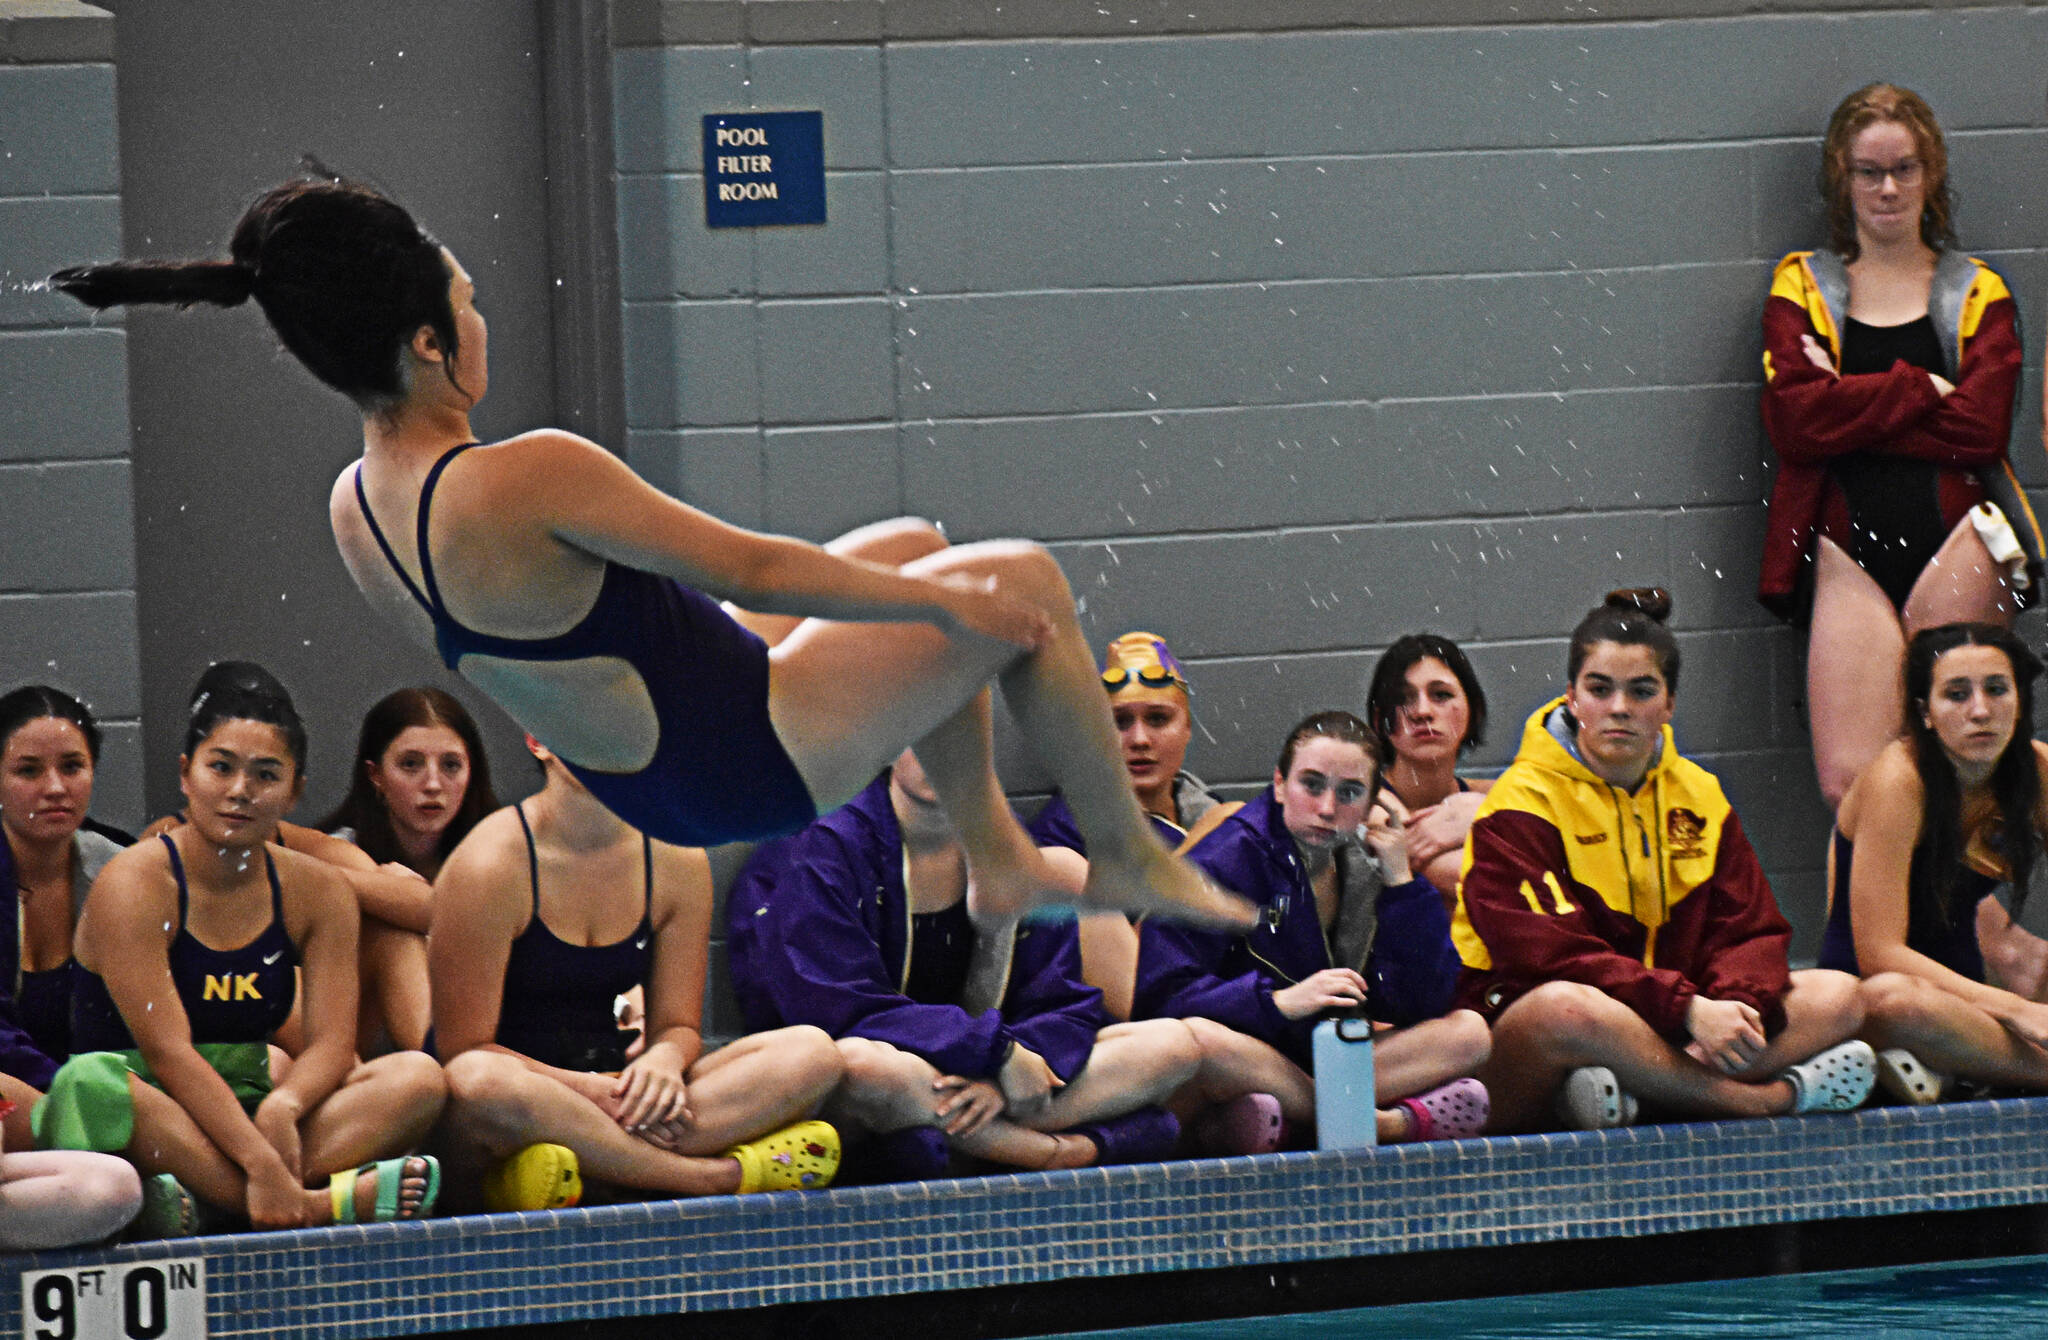 Kingston and North Kitsap gather around Ema Riegel to cheer her on while she performs her dives. Nicholas Zeller-Singh/Kitsap News Group Photos